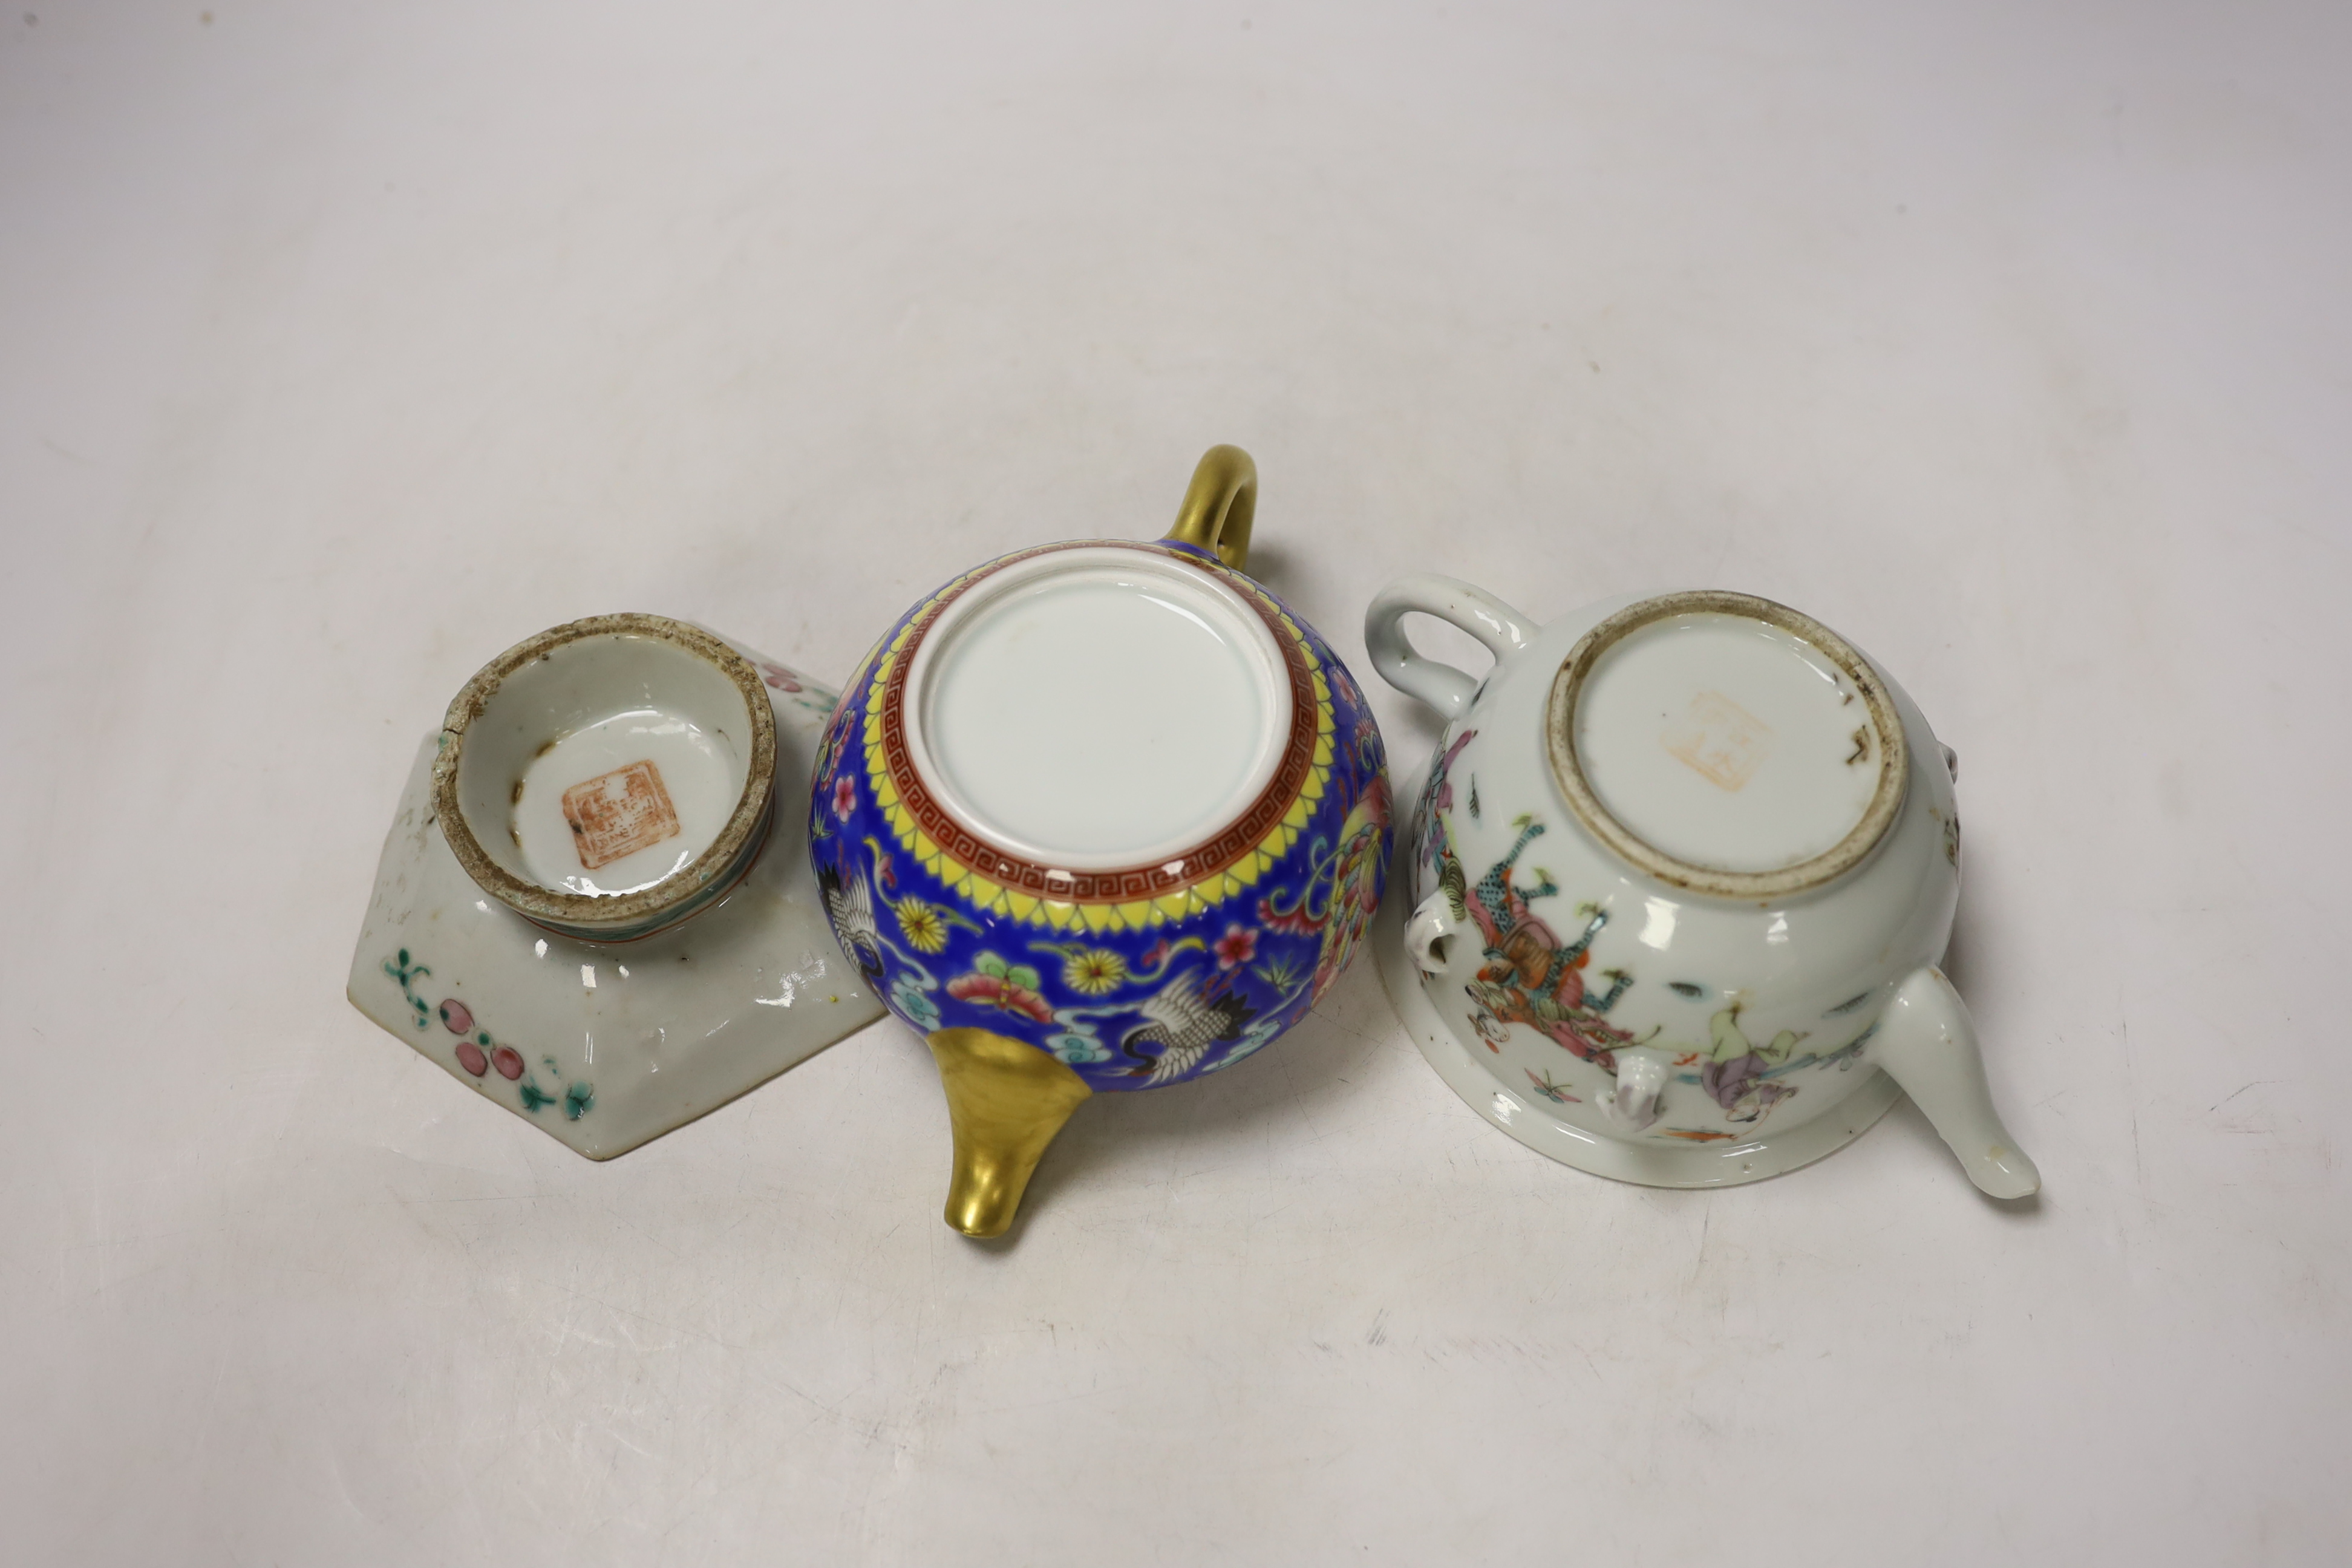 Two Chinese porcelain teapots (one missing cover) and a hexagonal pedestal dish, tallest 9.5cm